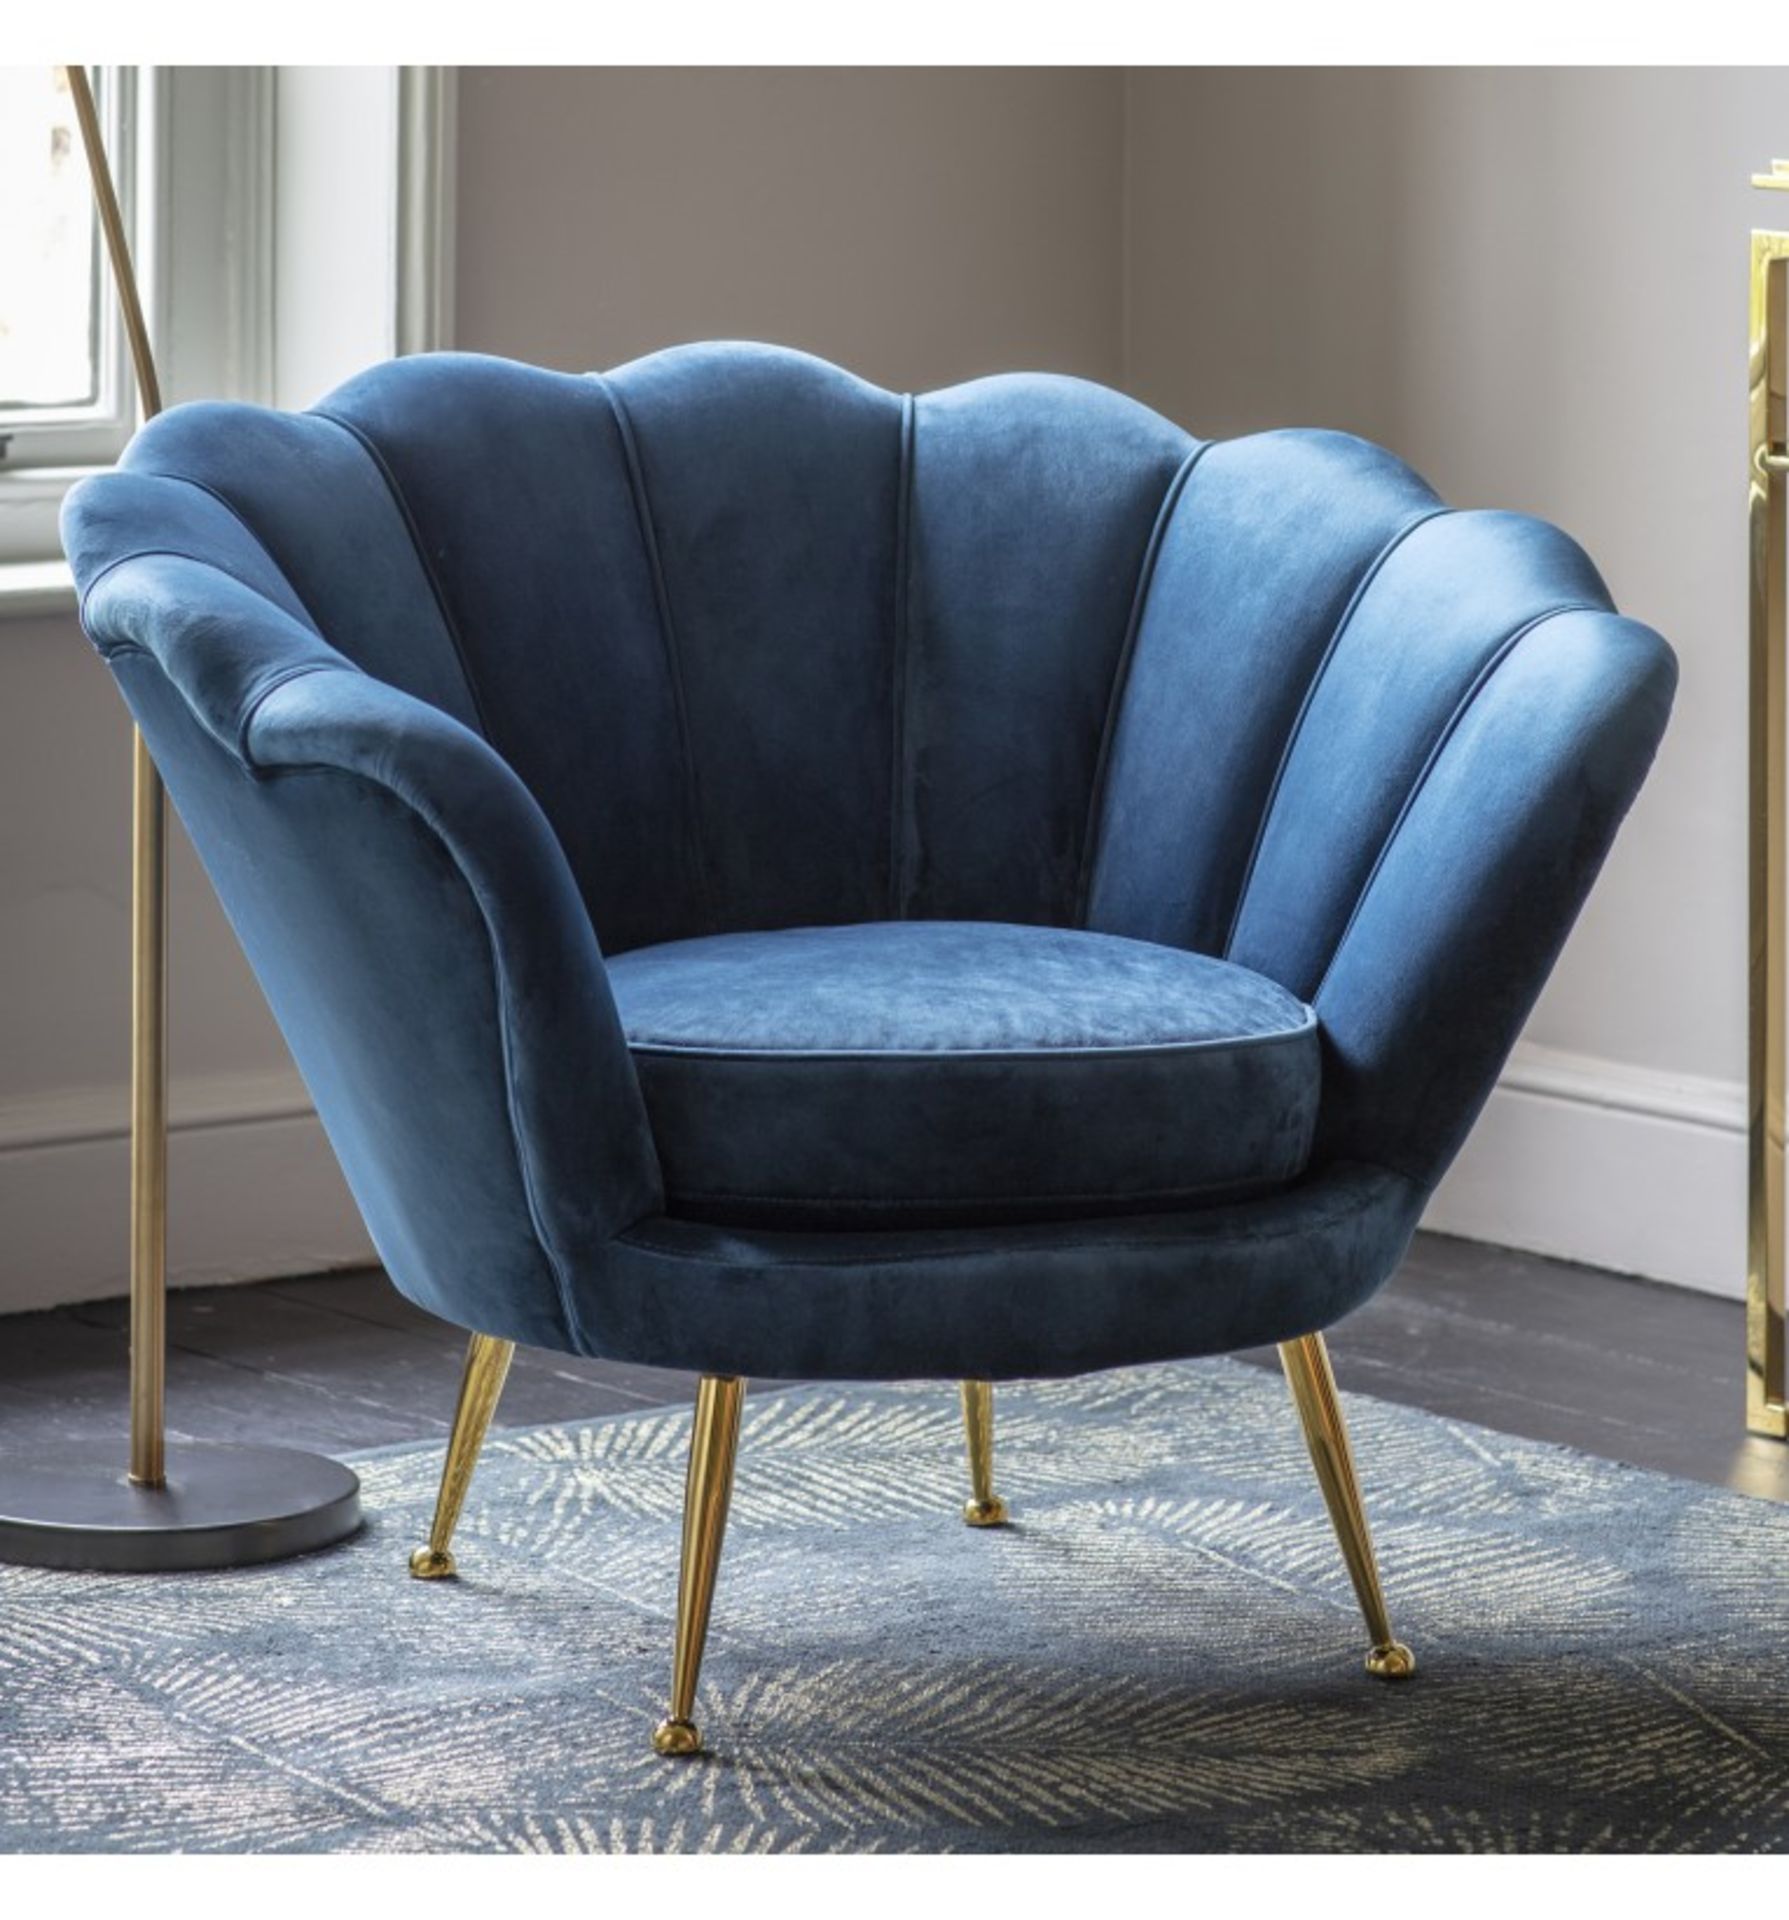 Rivello Armchair Inky Blue Art Deco inspired armchair, perfect for adding drama to your living